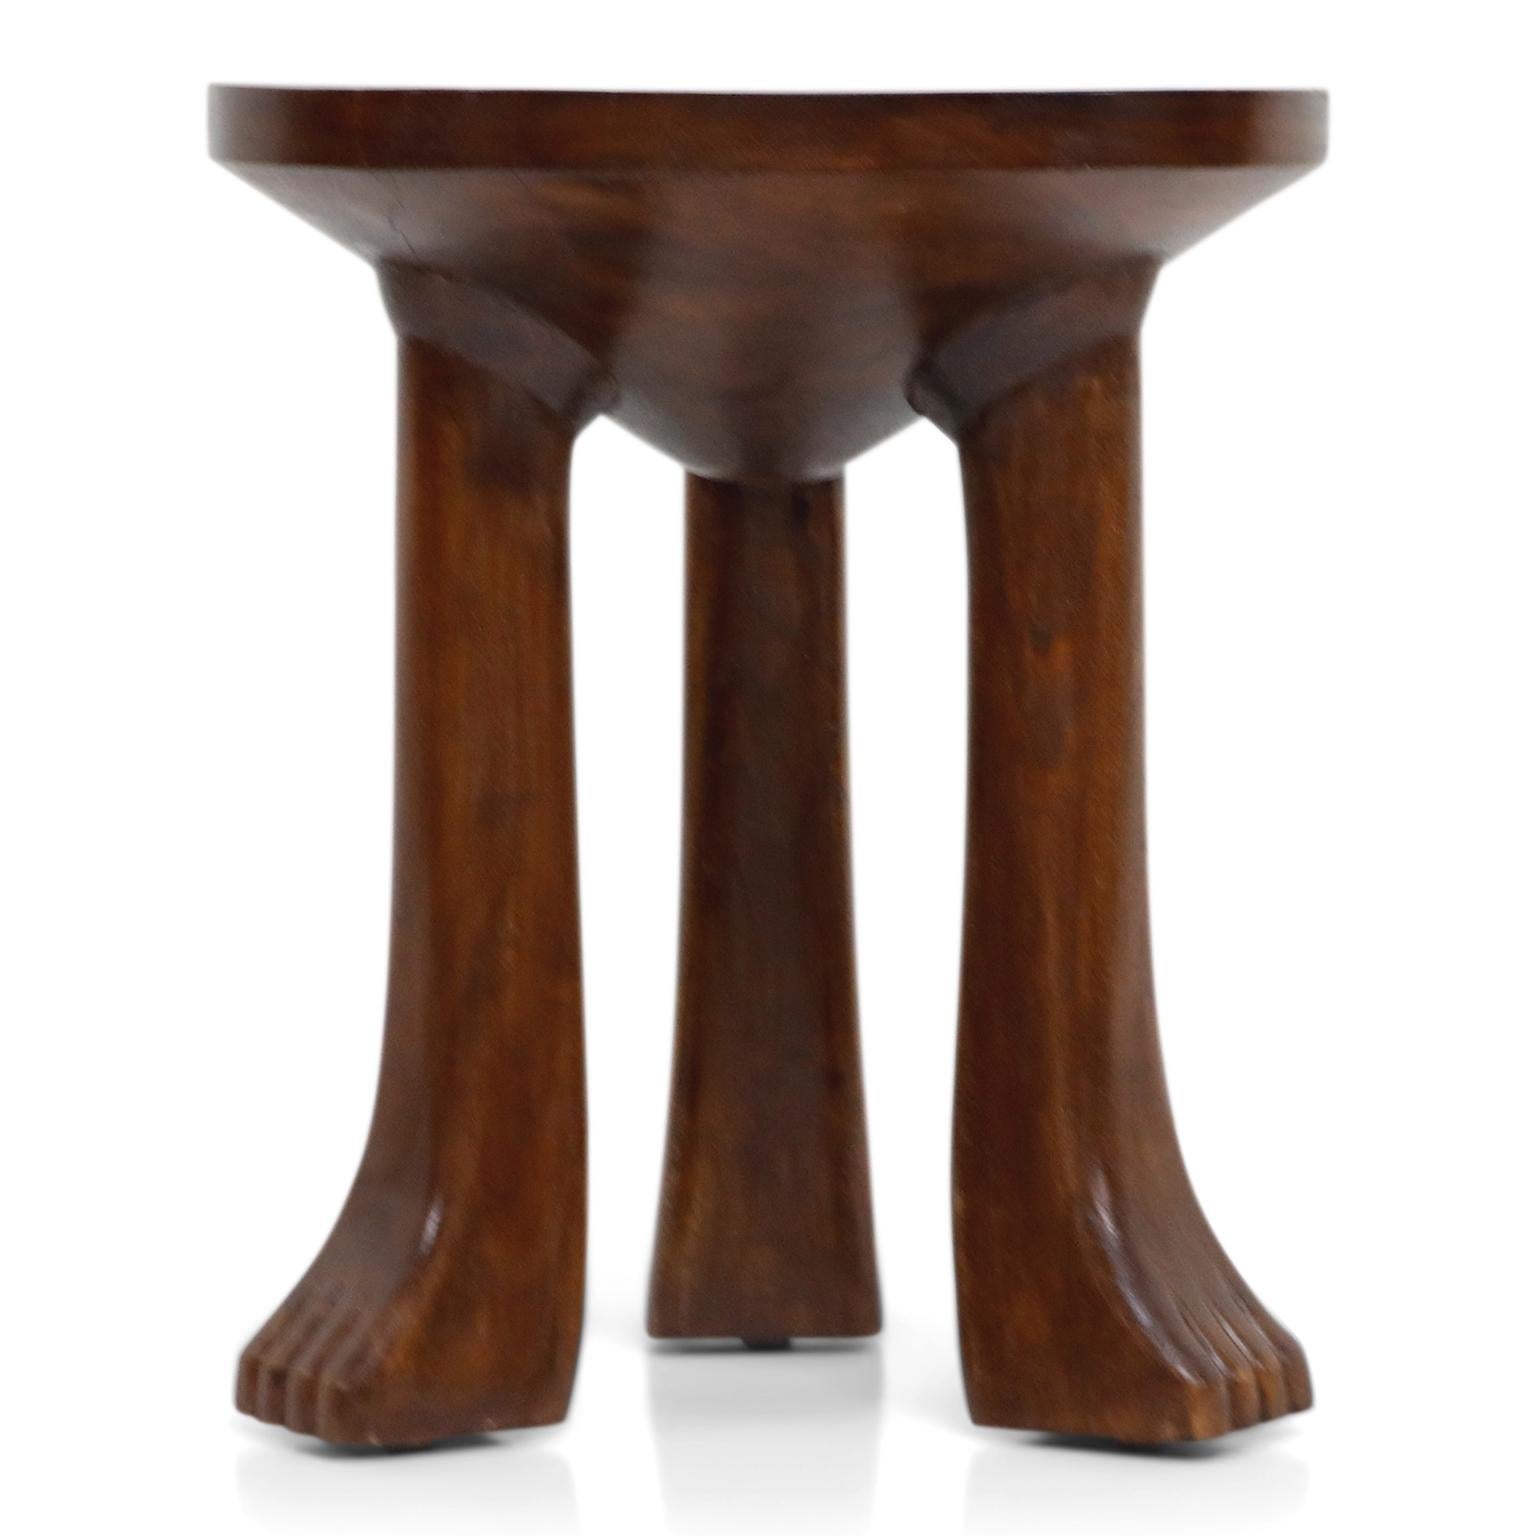 These attractive three legged carved teak stools (or side tables) are in the style of John Dickinson's 